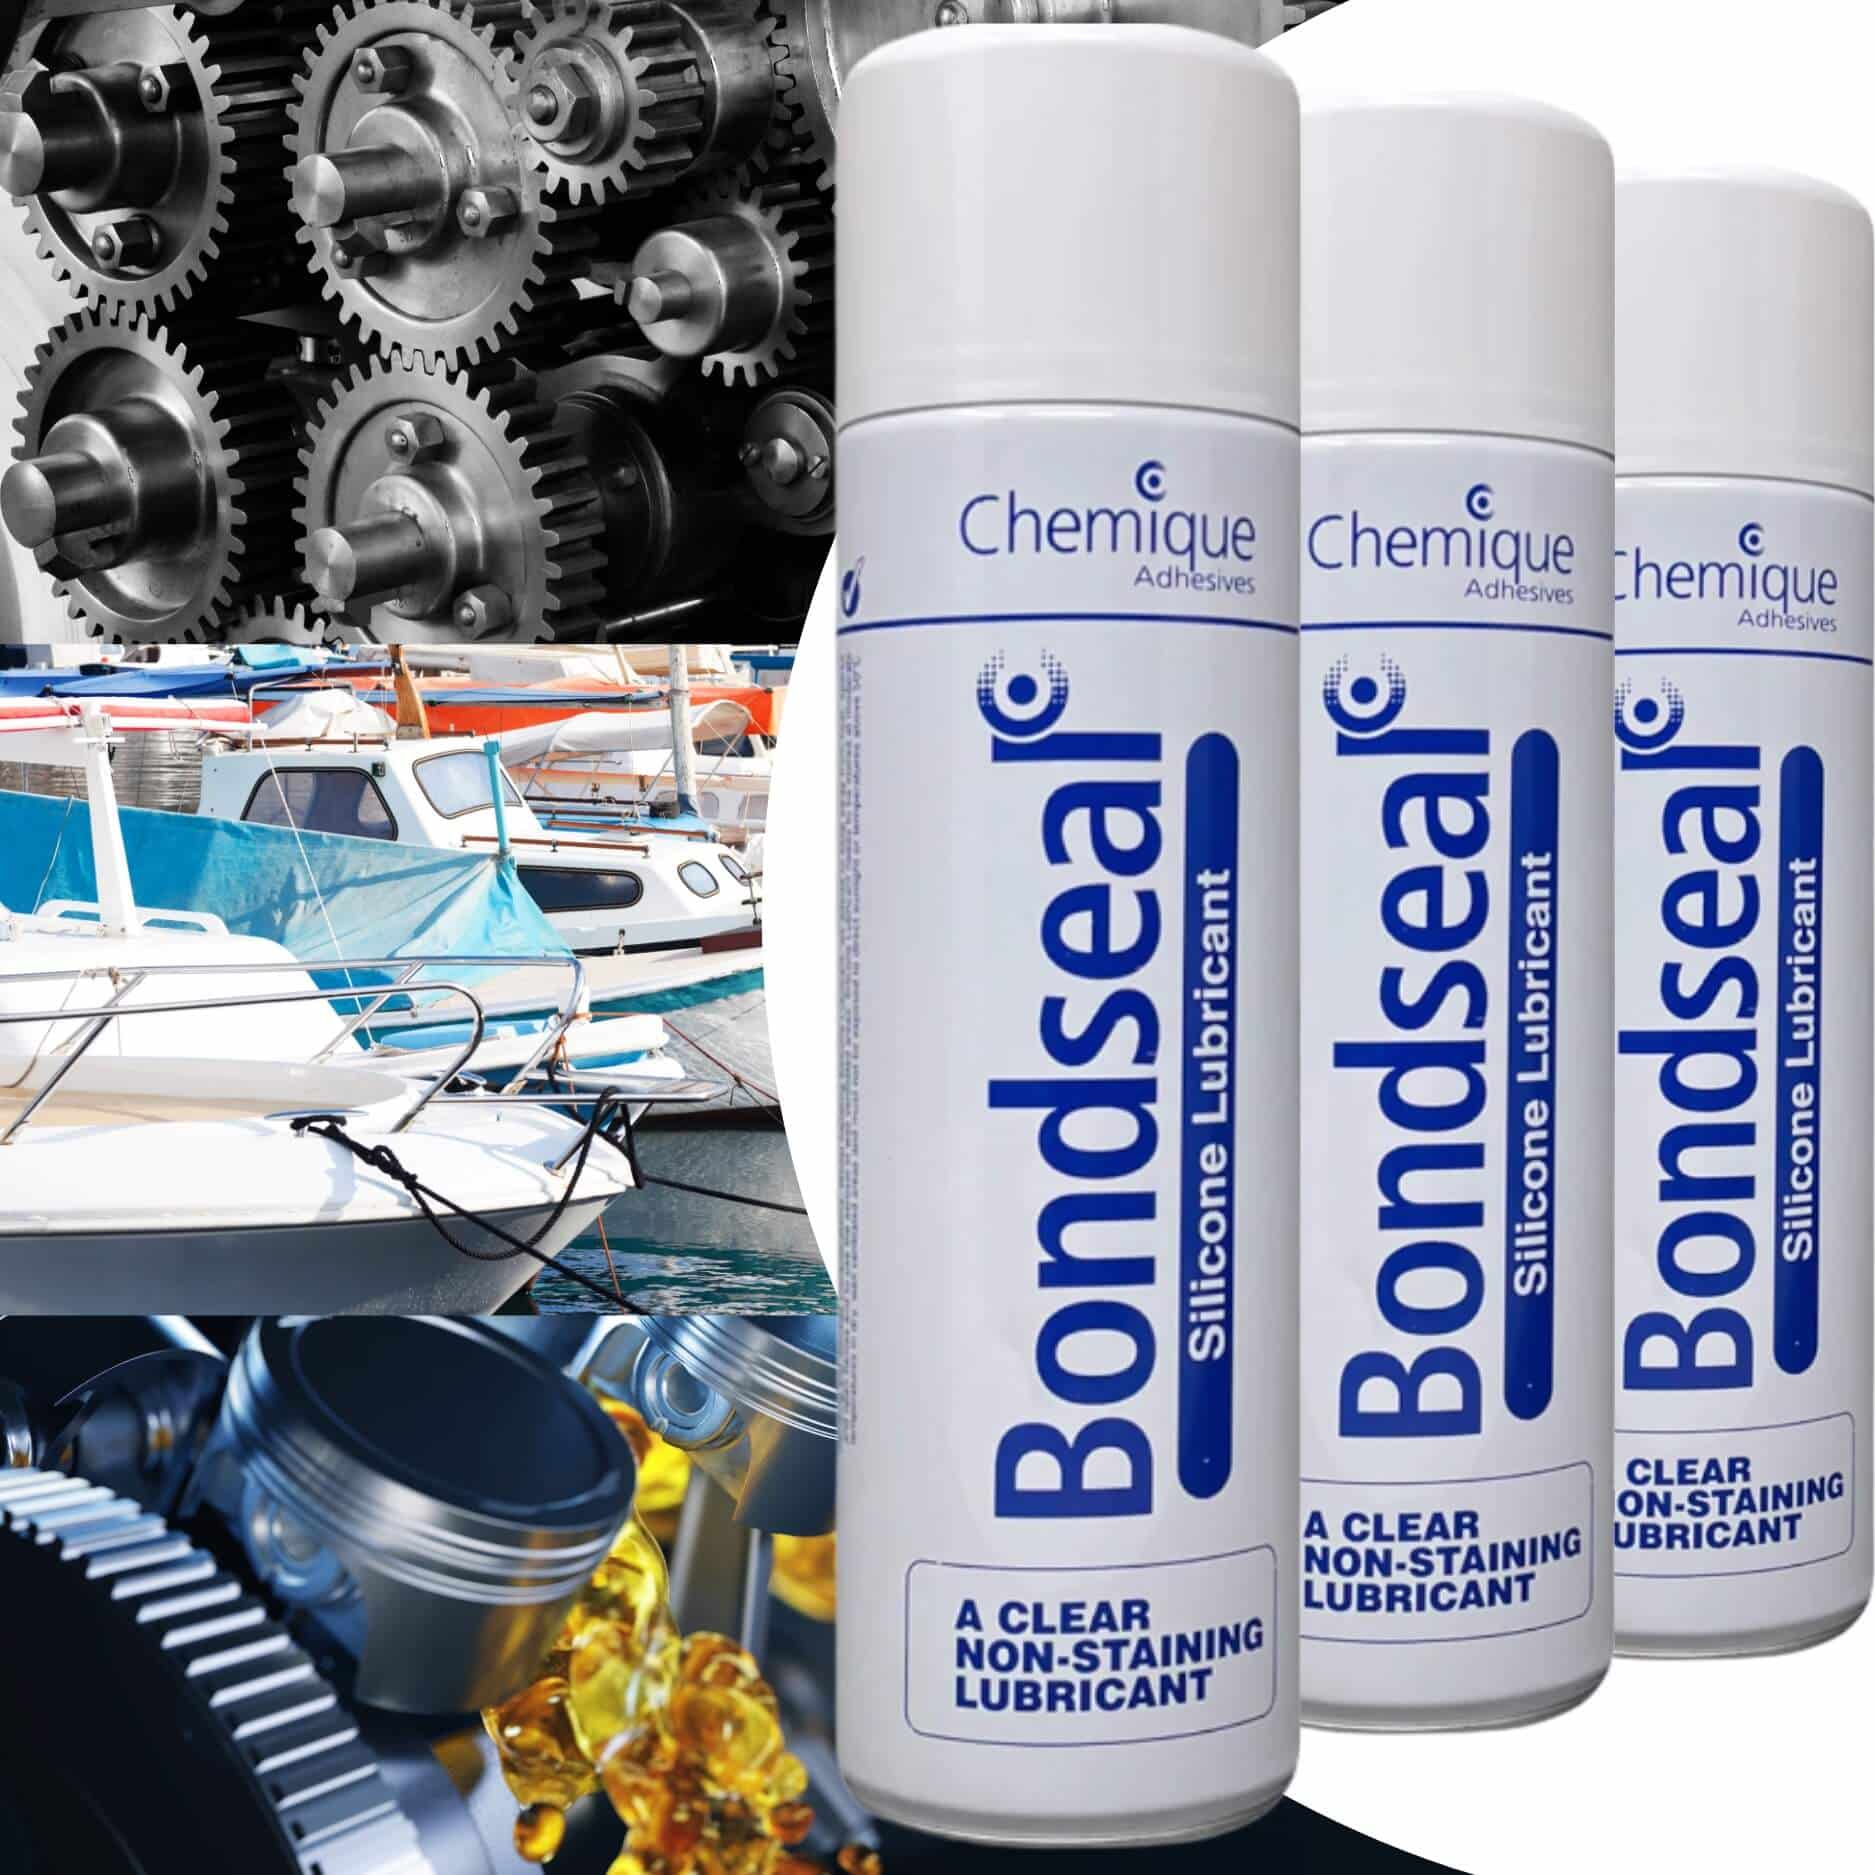 bondseal lubricant spray can with boats and cogs in the background